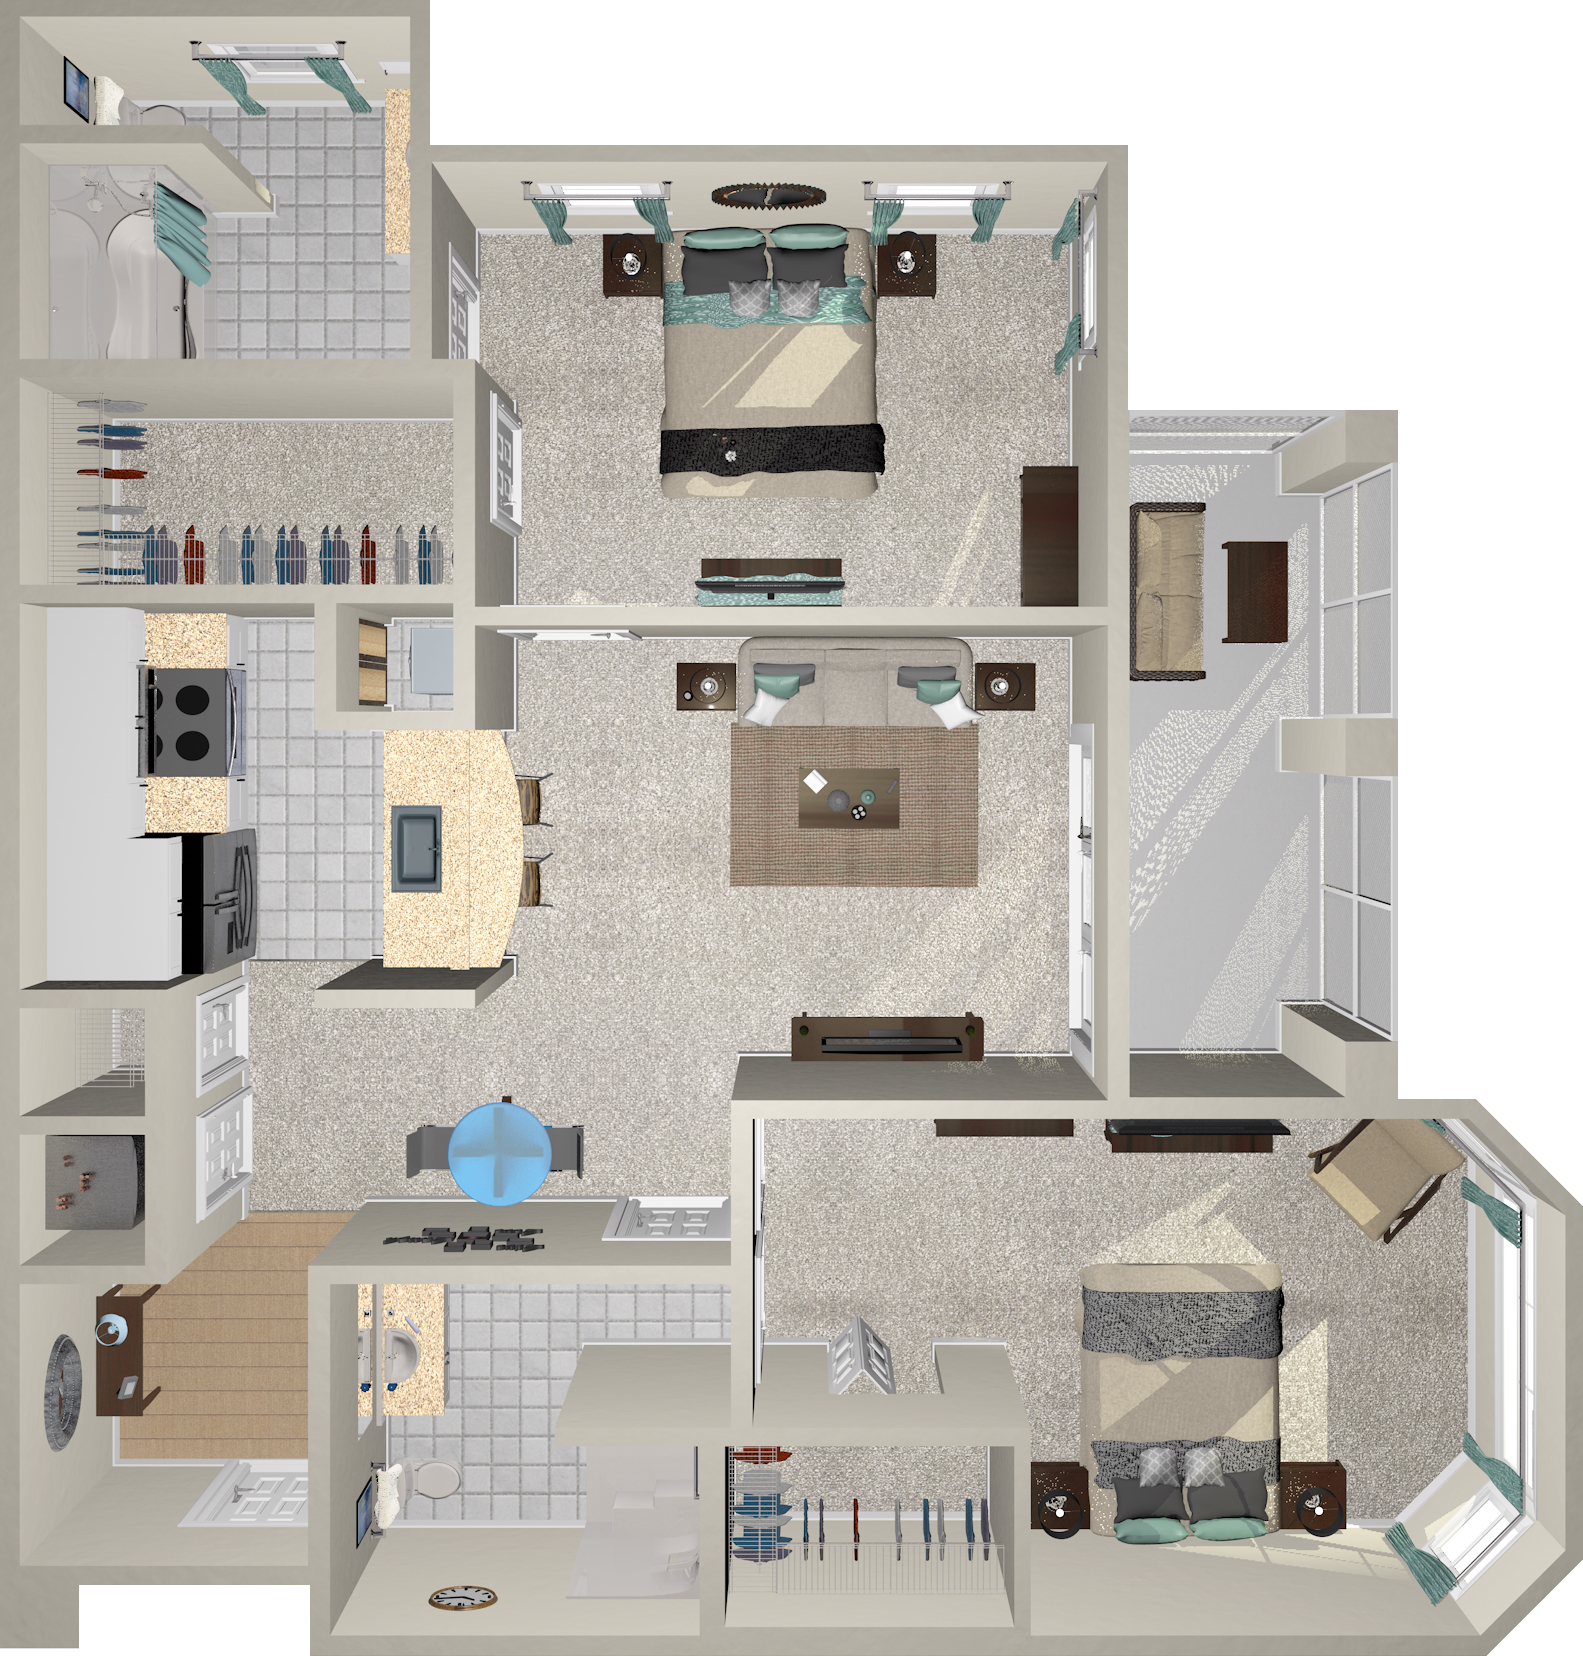 Symphony - Two Bedroom: 989 Sq. Ft.